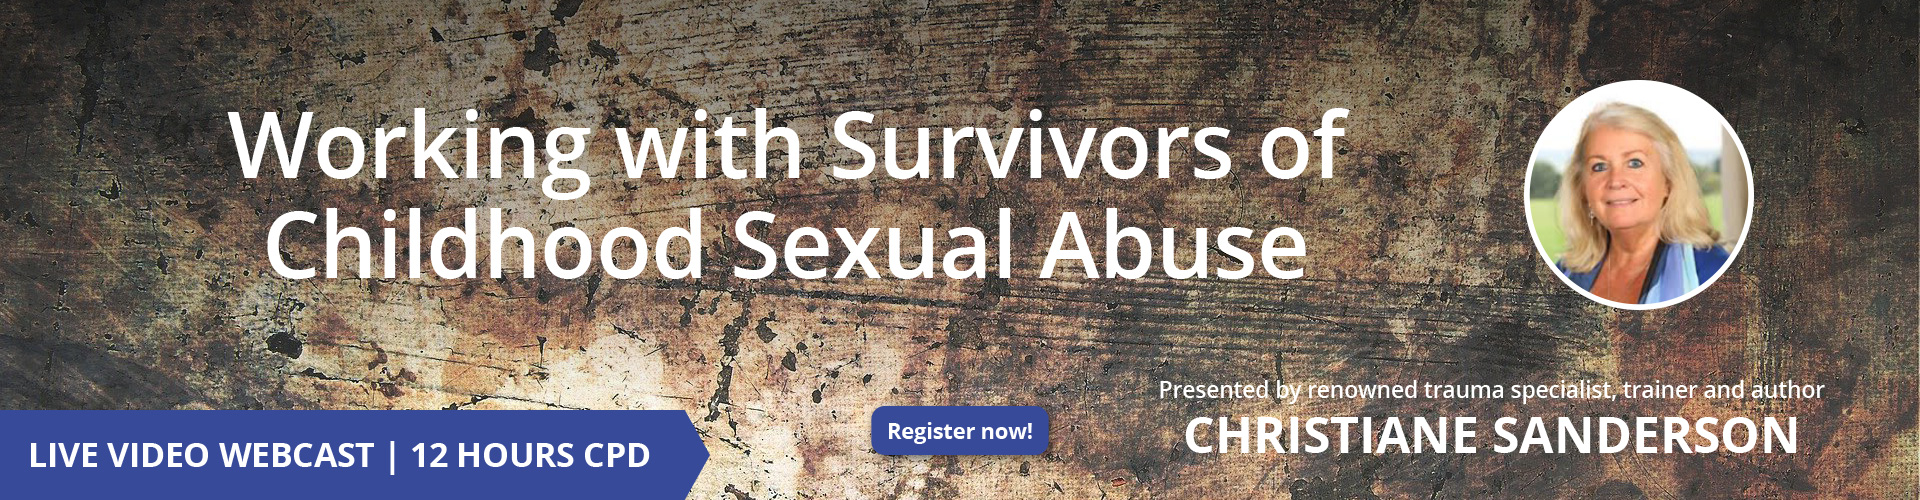 Working with Survivors of Childhood Sexual Abuse